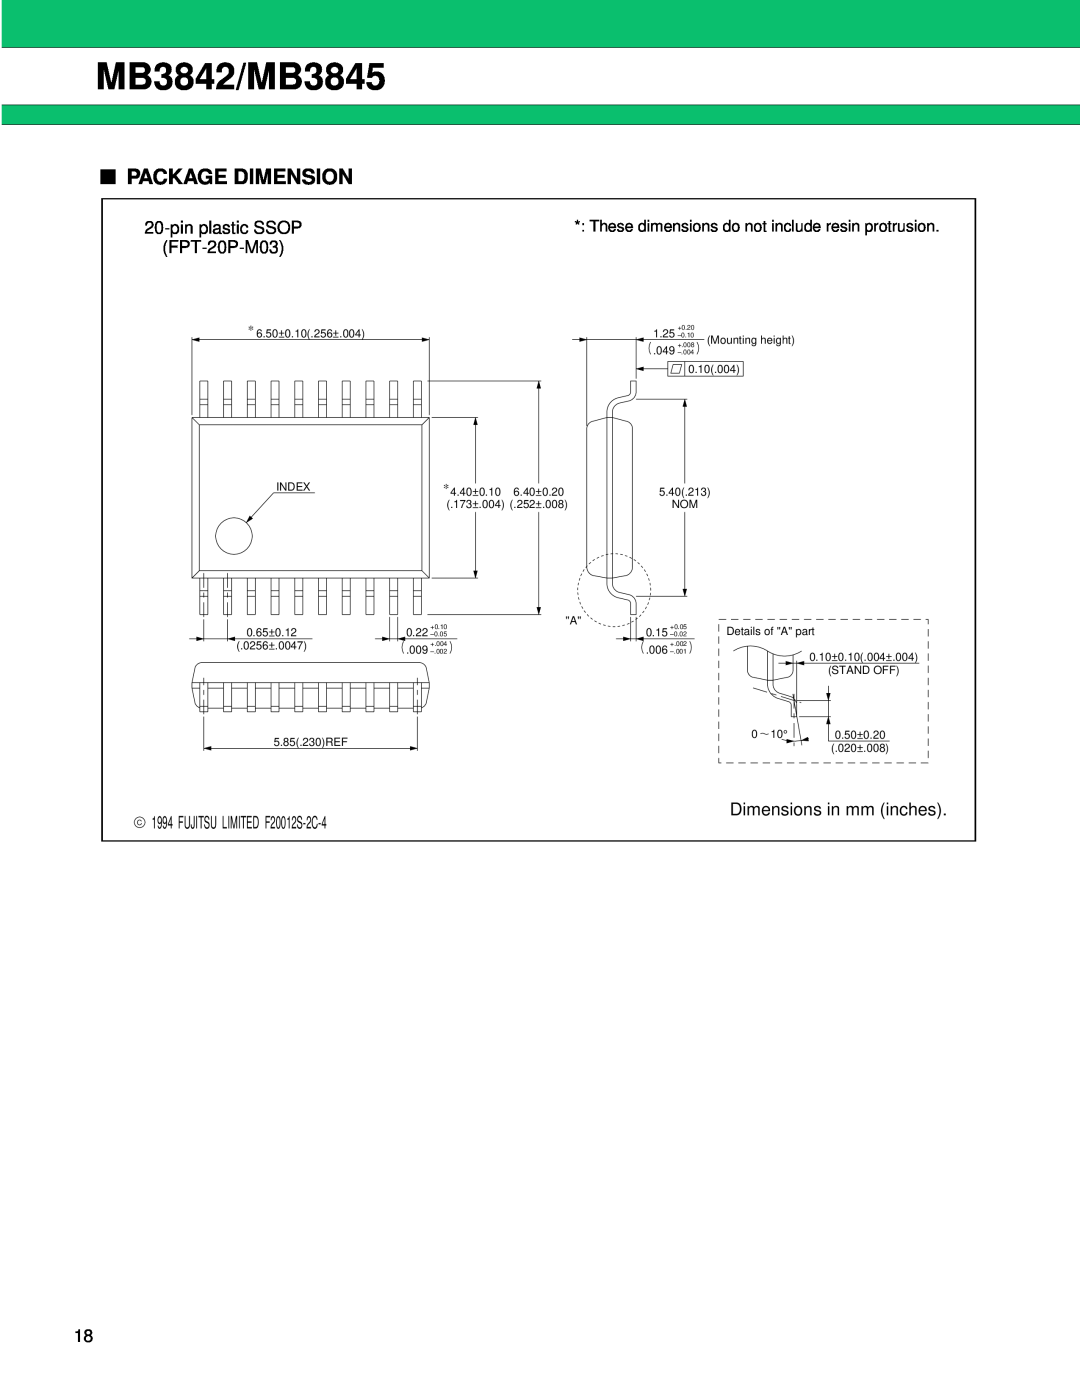 Fujitsu manual Package Dimension, MB3842/MB3845, These dimensions do not include resin protrusion 